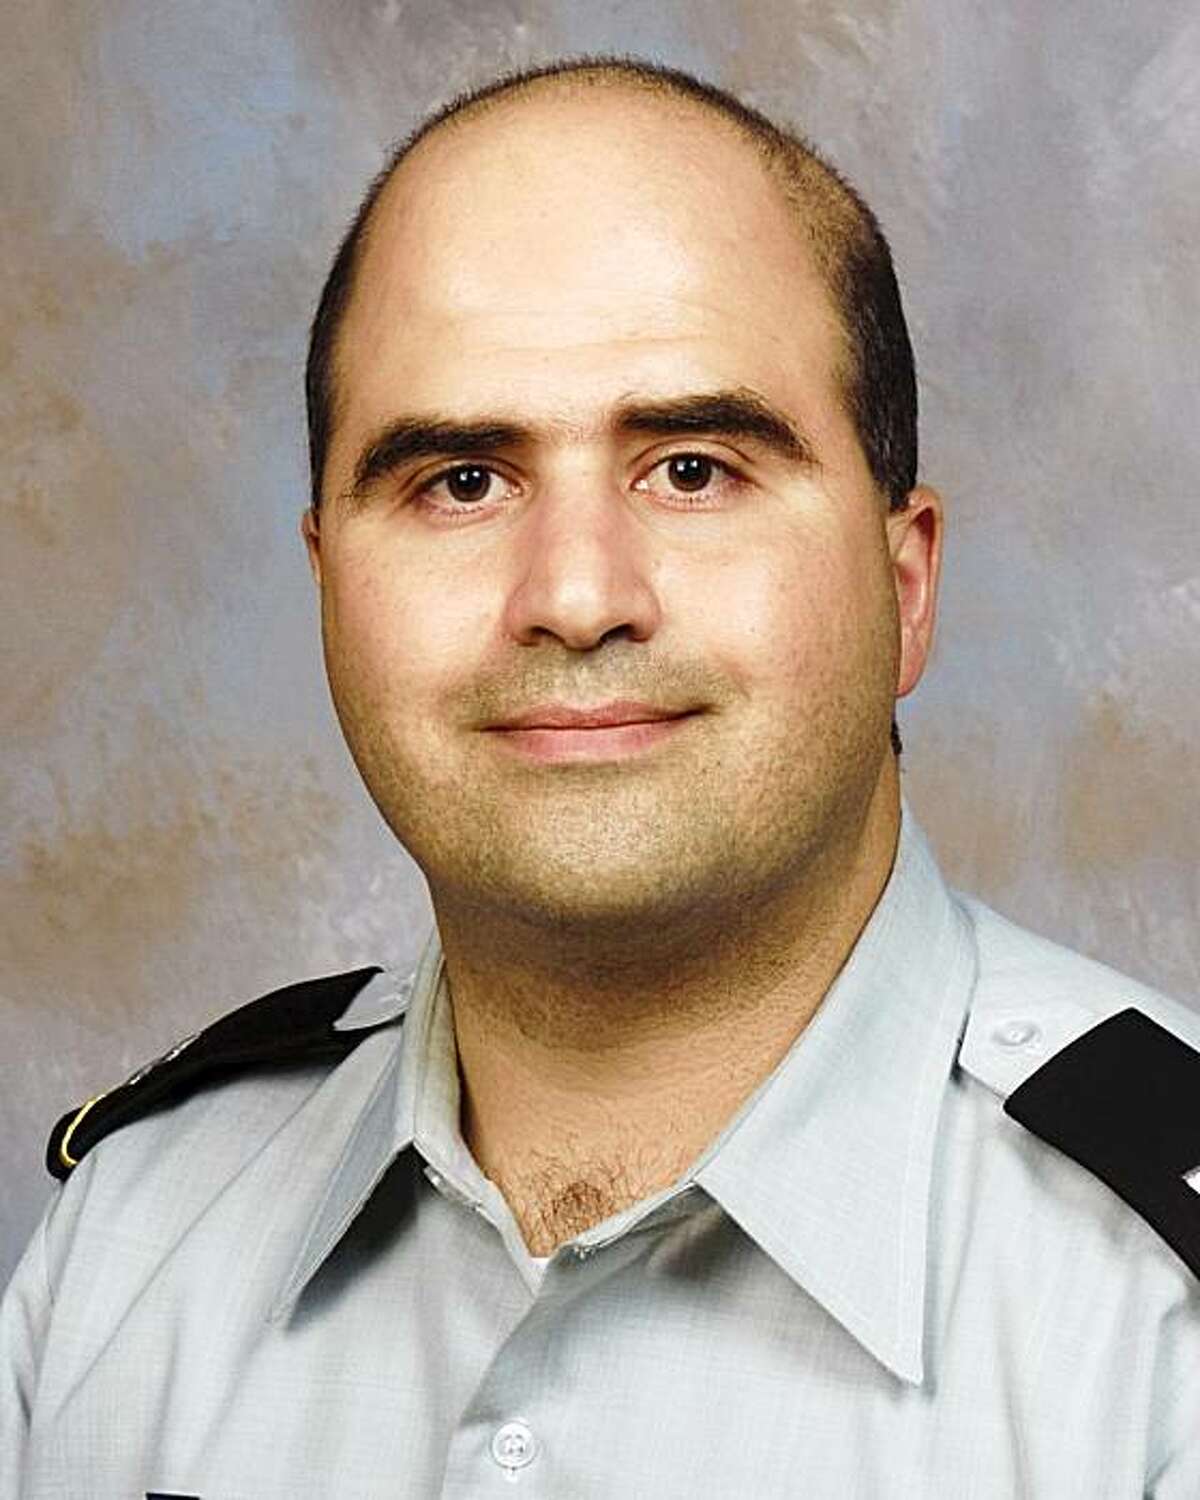 The 2007 picture provided by the Uniformed Services University of the Health Sciences shows Nidal Malik Hasan when he entered the program for his Disaster and Military Psychiatry Fellowship. Authorities said he went on the killing spree at Fort Hood, Texas which left 13 people dead. (AP Photo/Uniformed Services University of the Health Sciences)